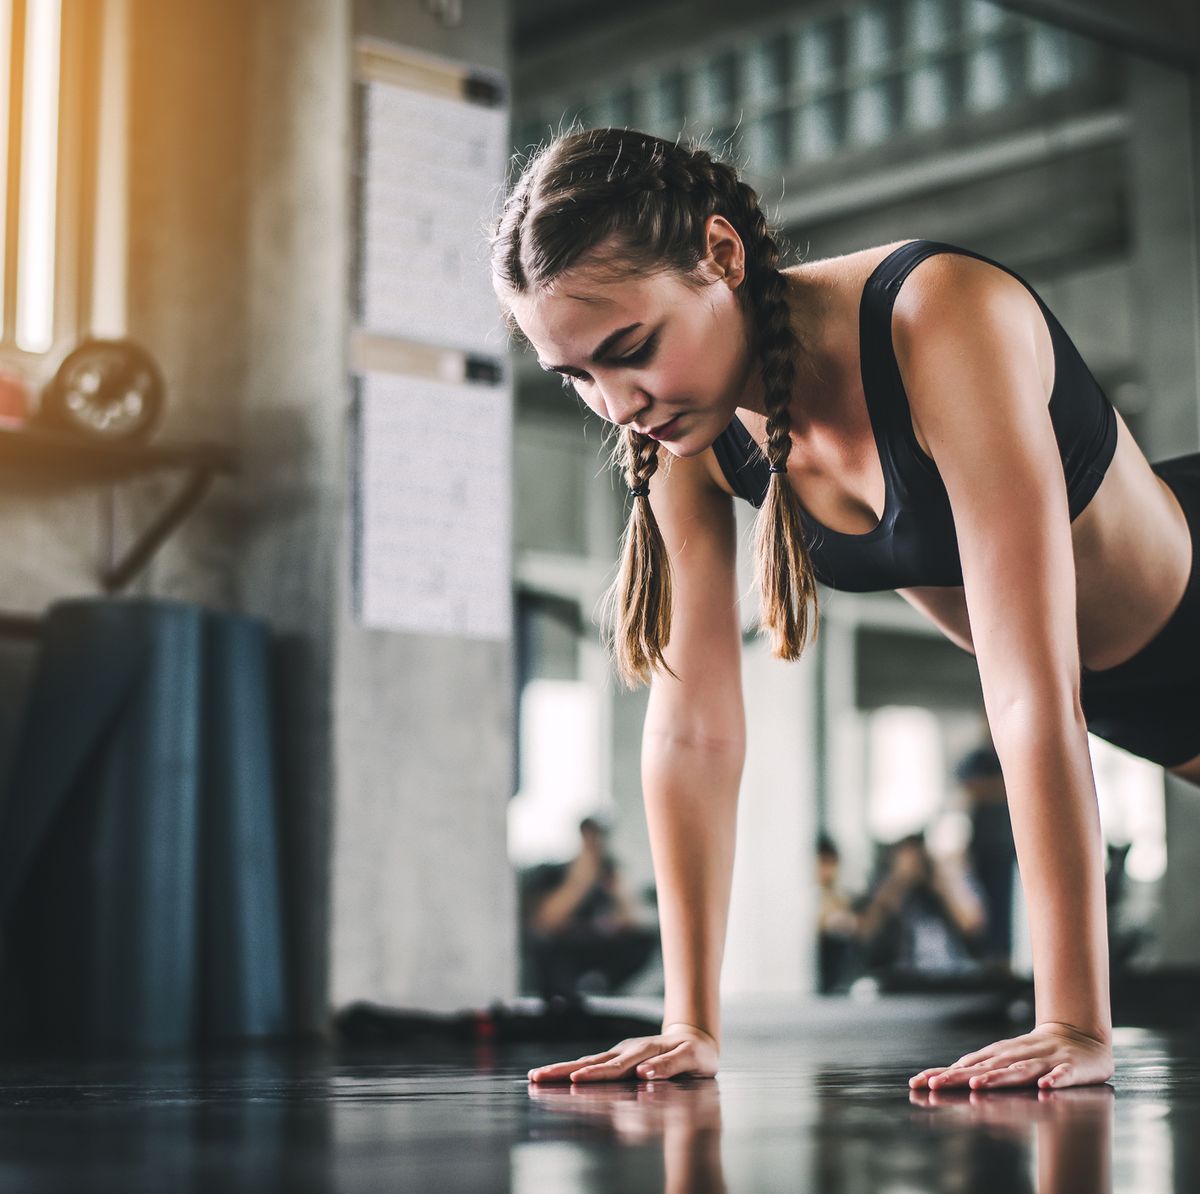 HIIT Workouts at Home: 15 High-Intensity Exercises